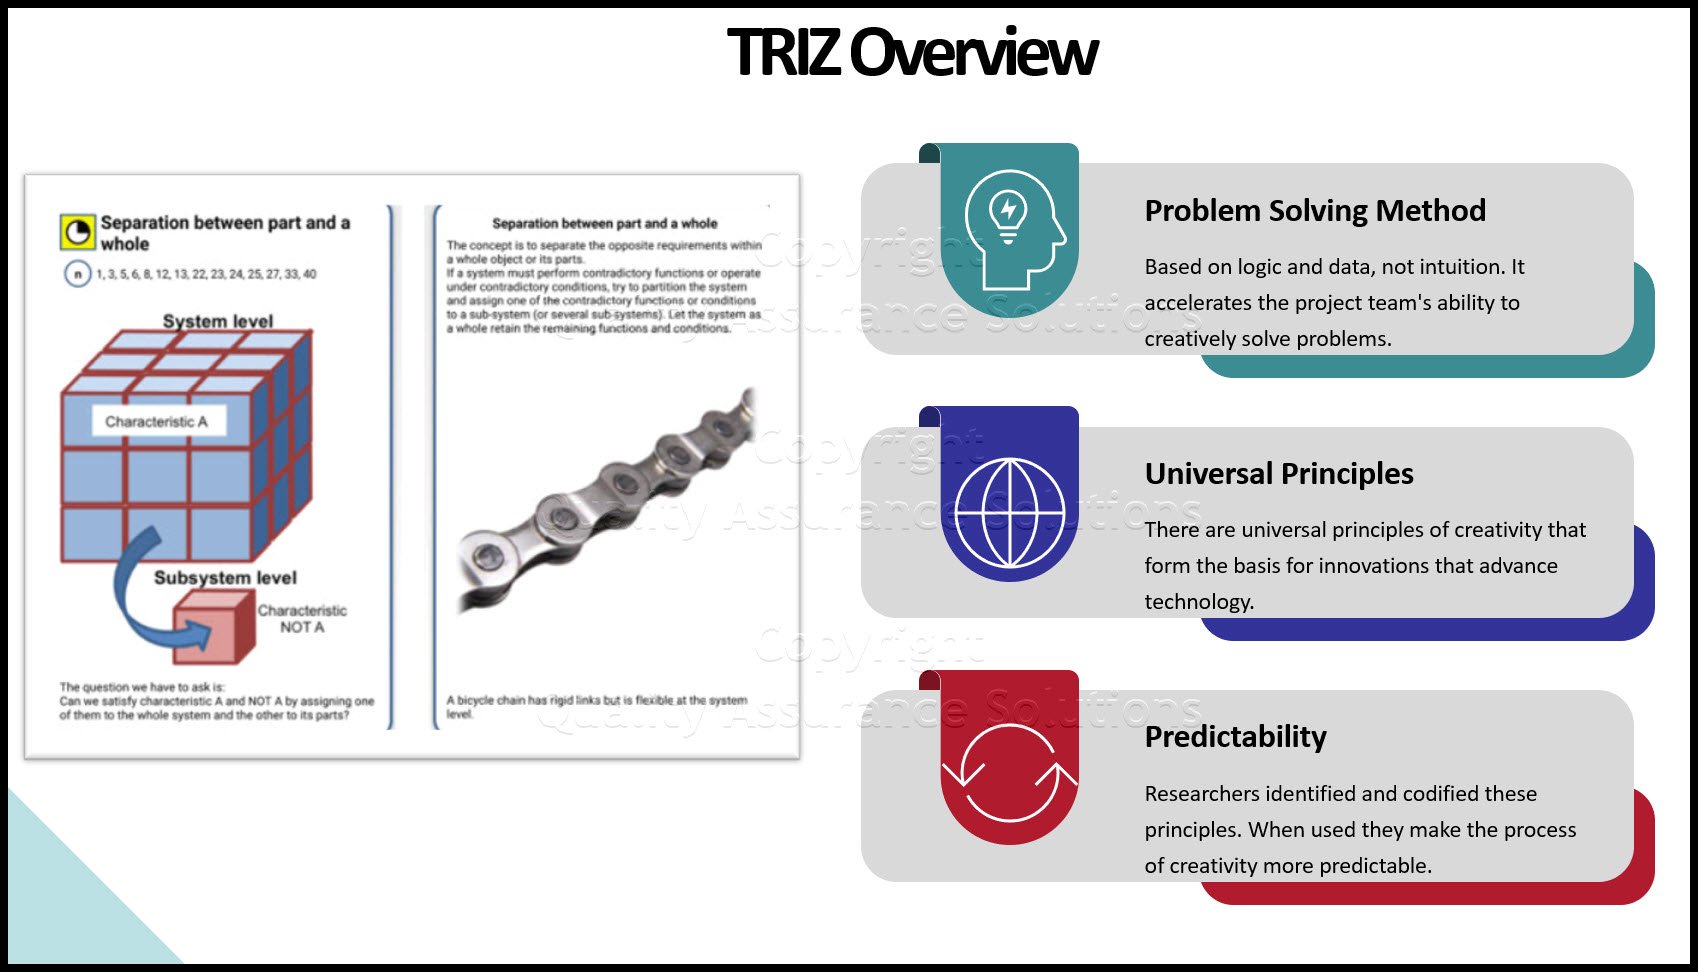 Discusses the Triz tool and reasons for the creation of it. 